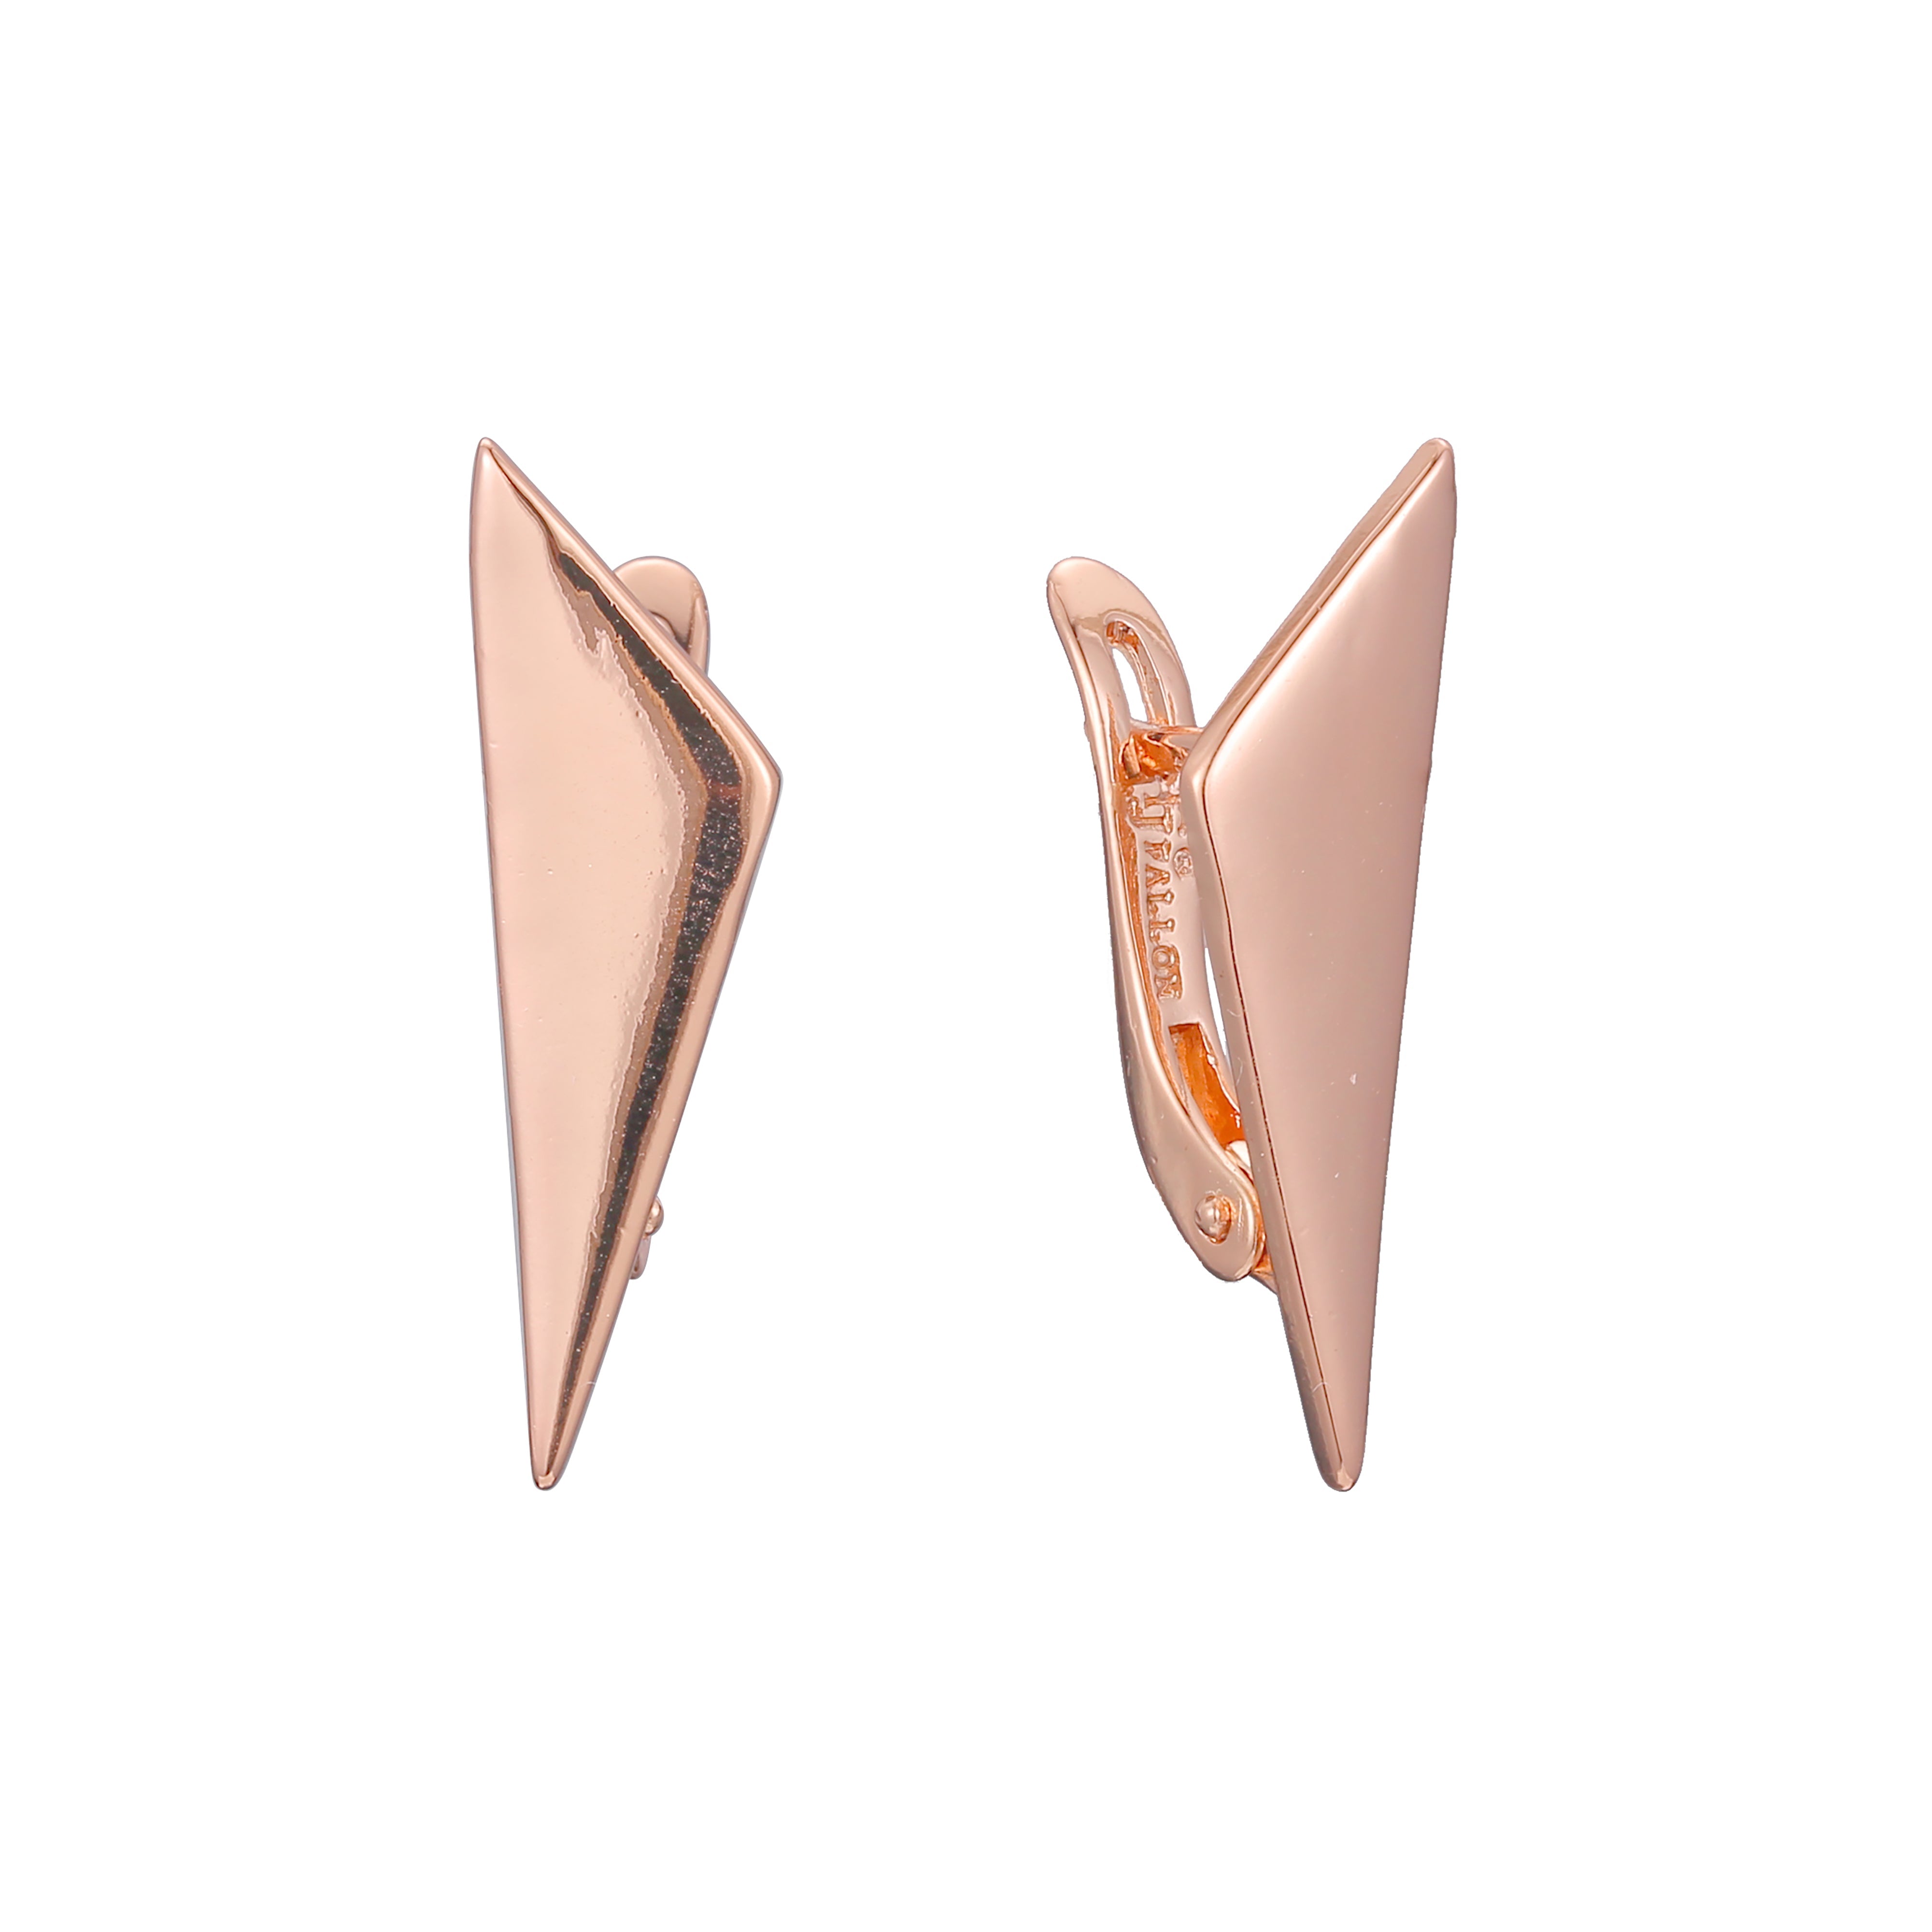 Geometric triangle earrings in 14K Gold, Rose Gold plating colors